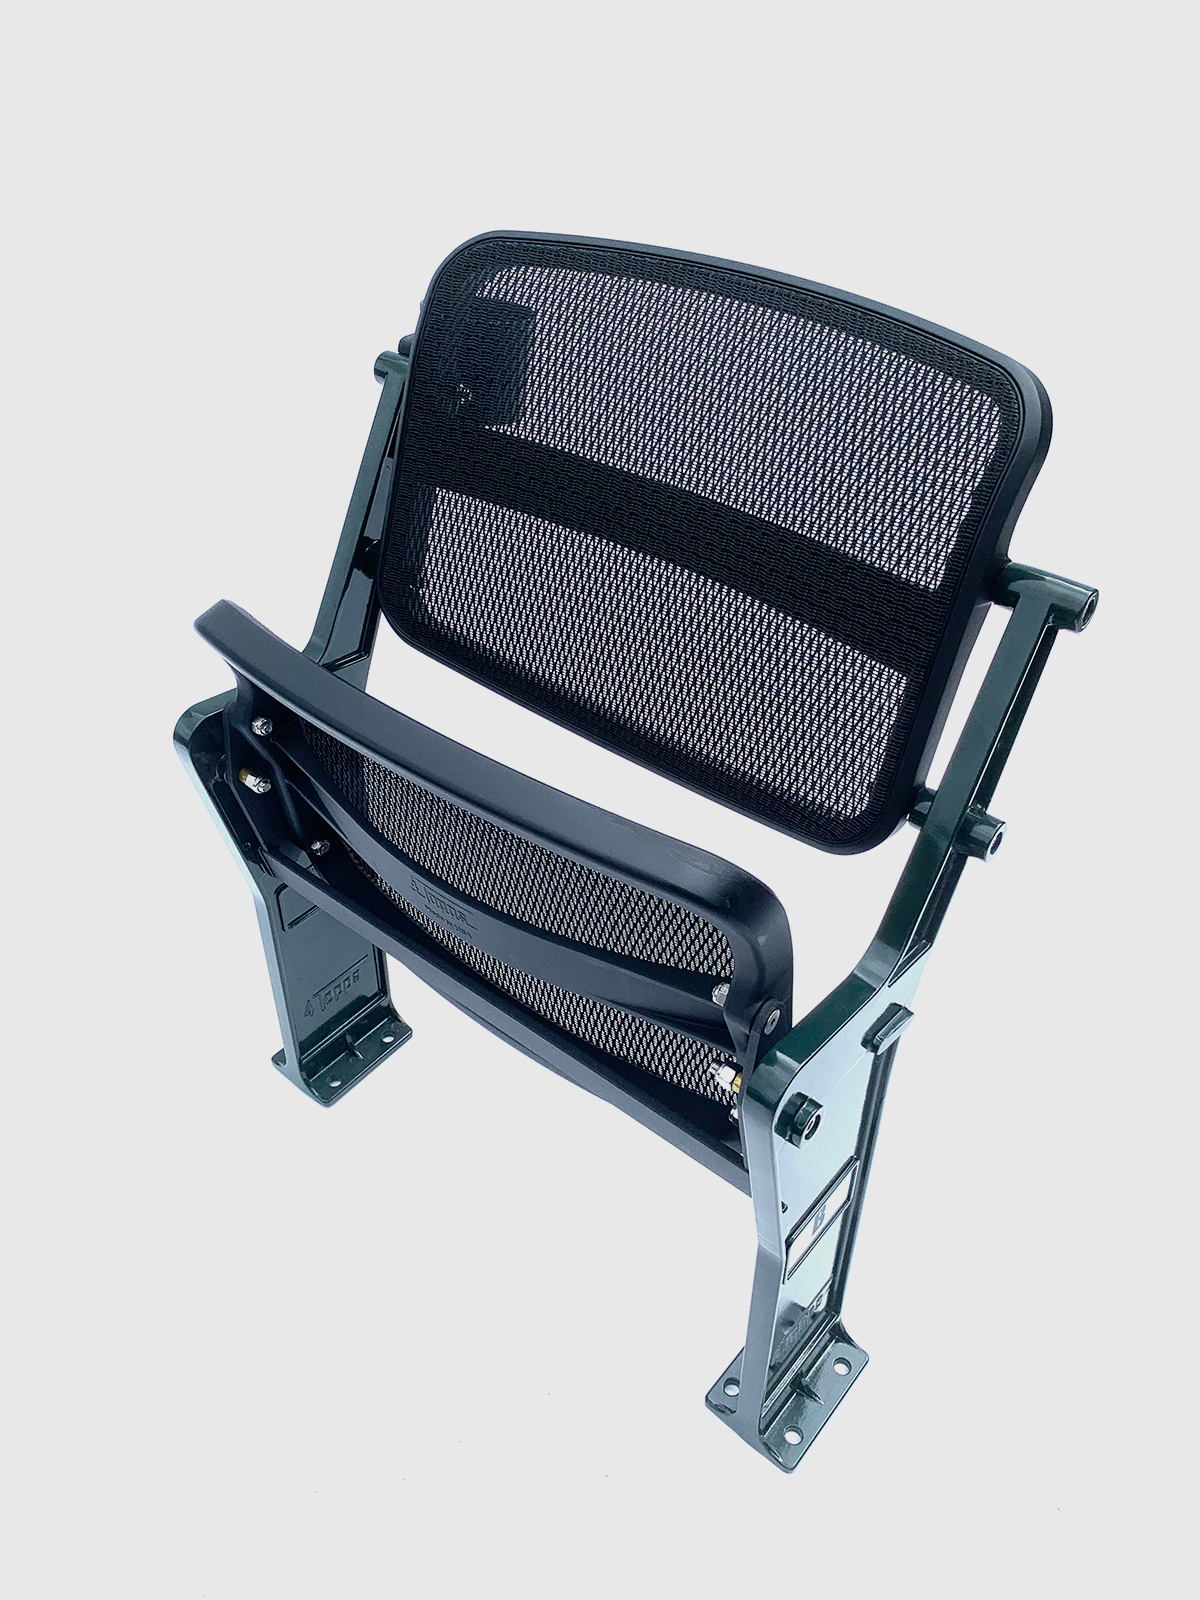 Top angled view of 4Topps slim line seat on white background